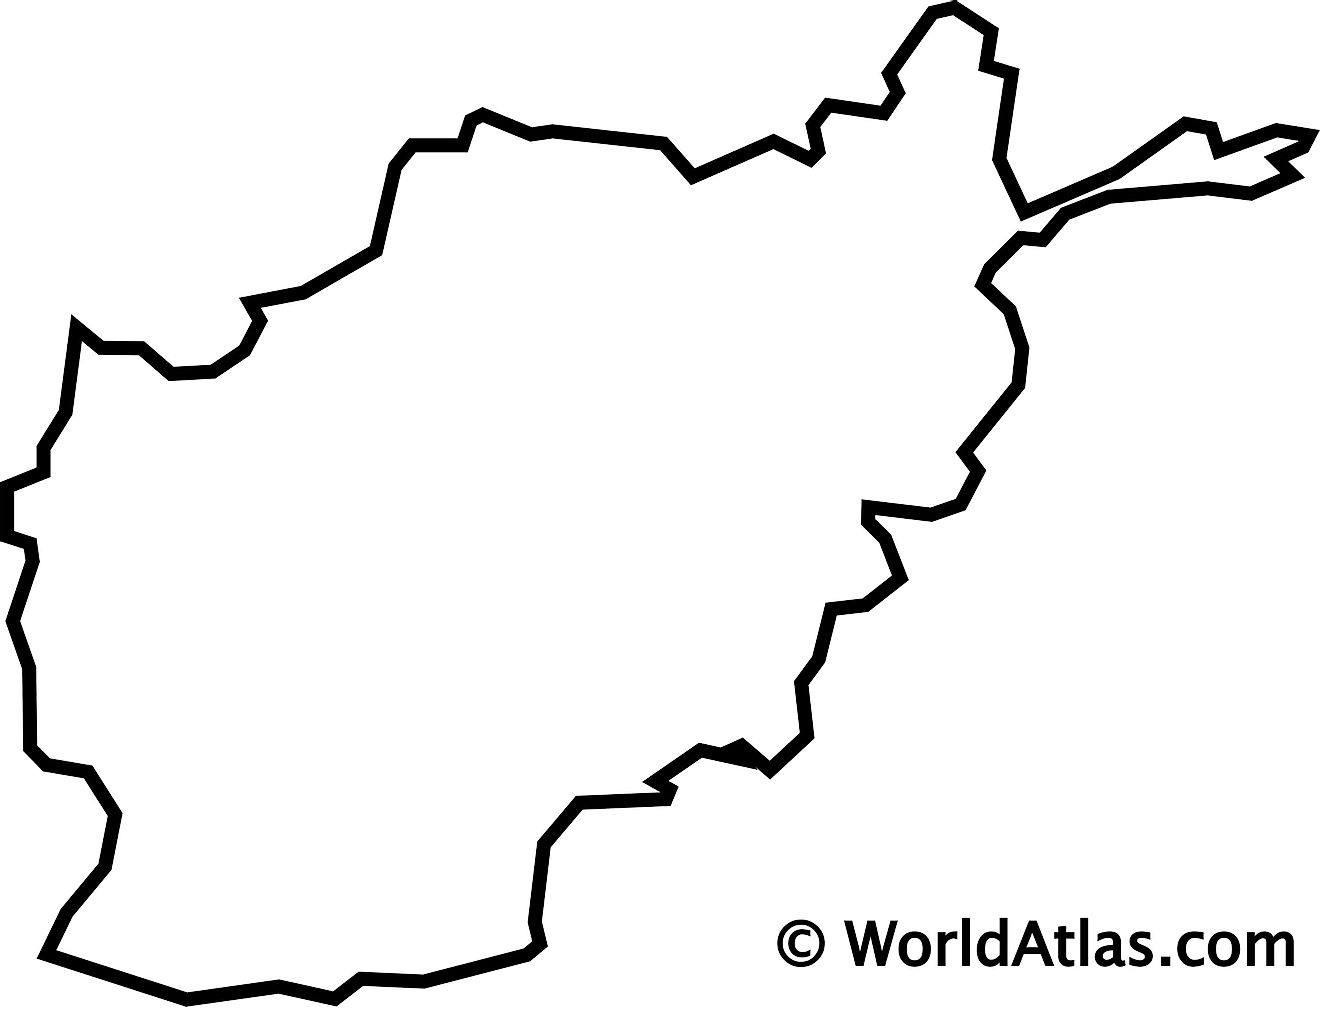 Blank Outline Map of Afghanistan